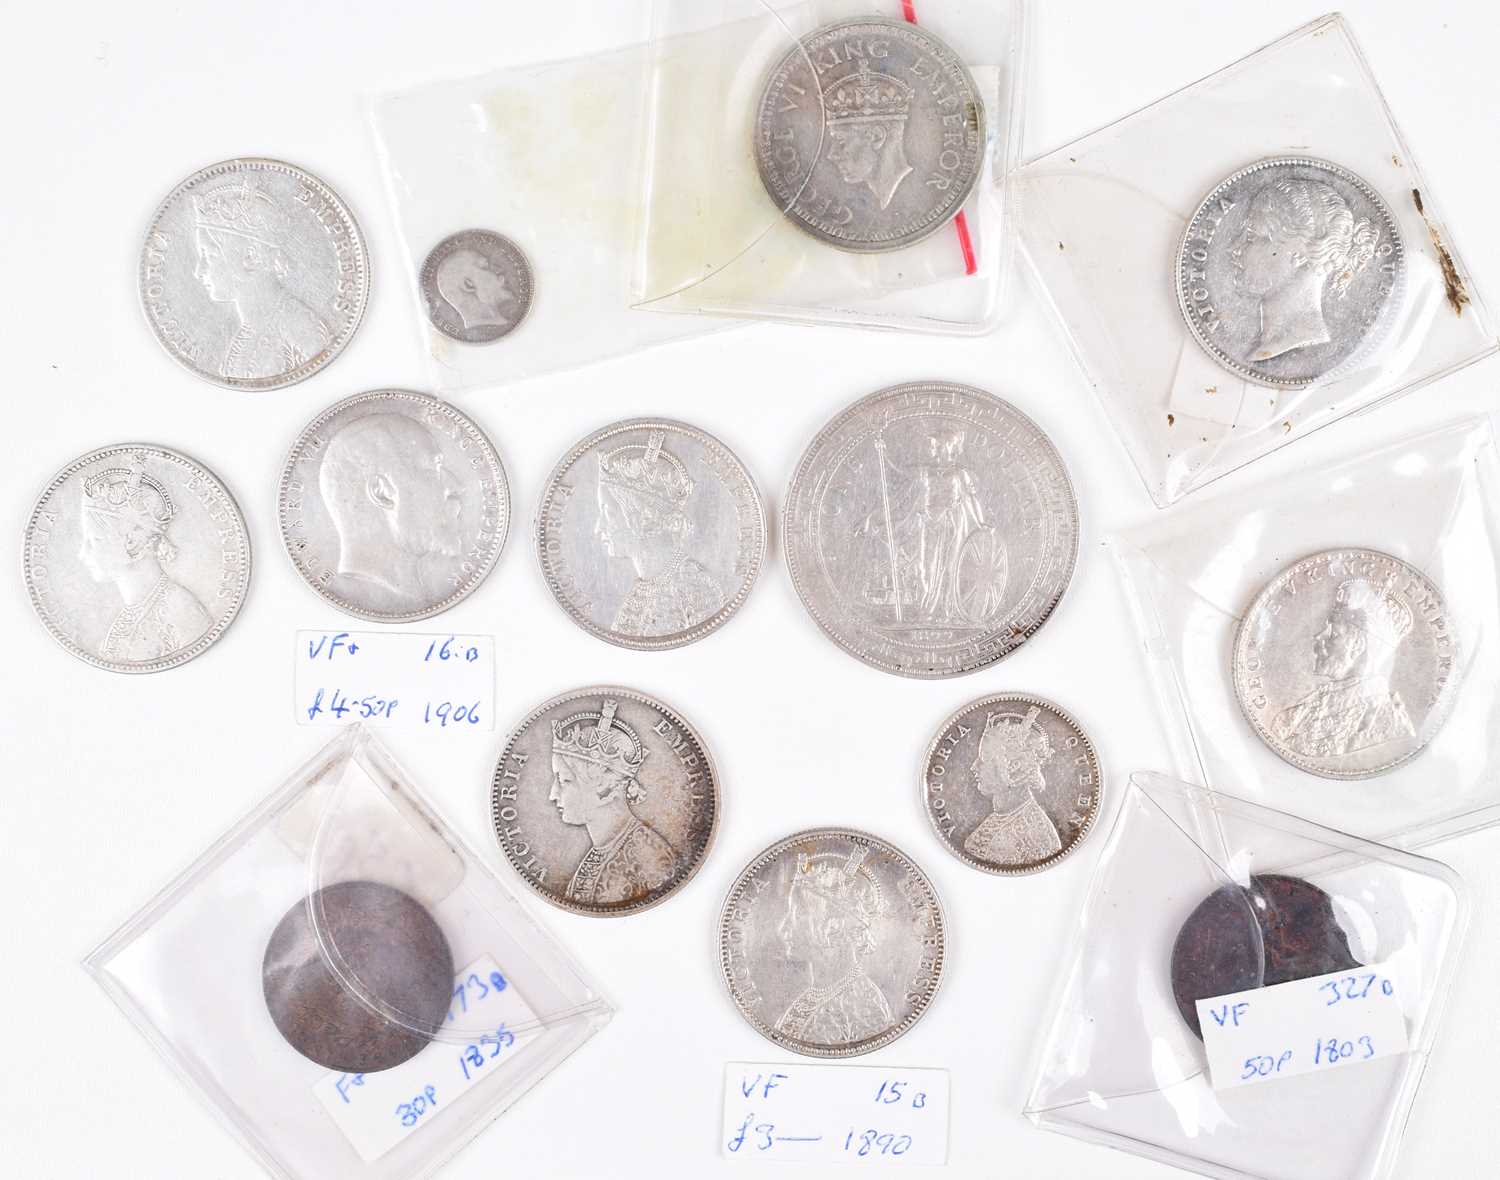 Lot 56 - Selection of British Indian silver coinage from Queen Victoria to George VI.